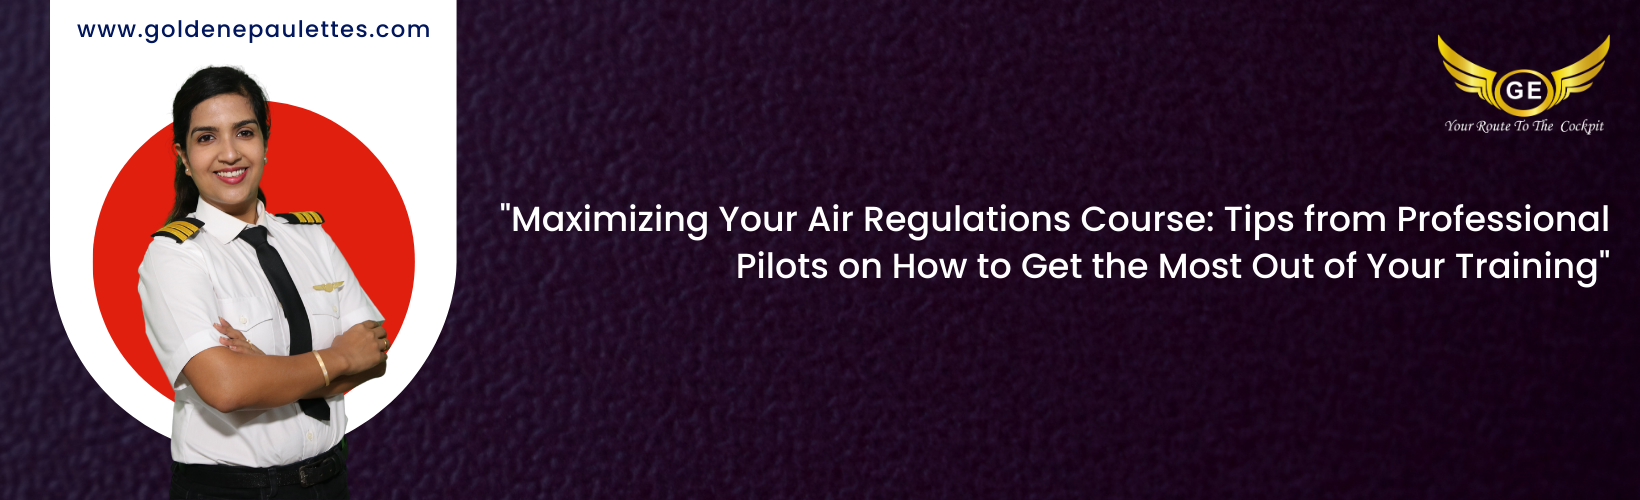 The Benefits of Taking an Online Air Regulations Course